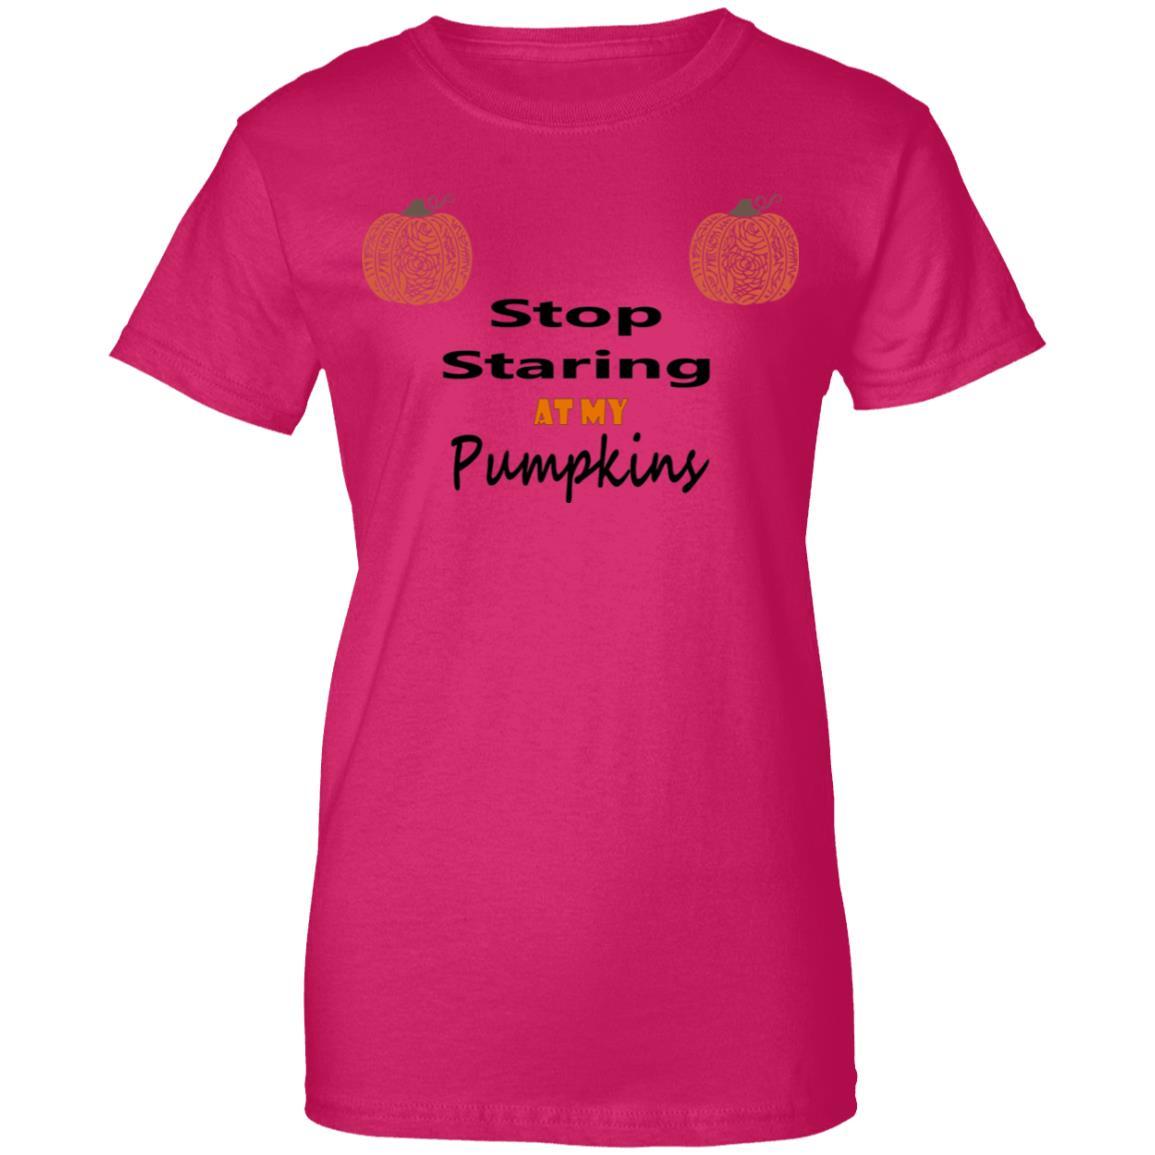 T-Shirts Heliconia / X-Small WineyBitches.Co "Stop Staring At My Pumpkins" Ladies' 100% Cotton T-Shirt WineyBitchesCo